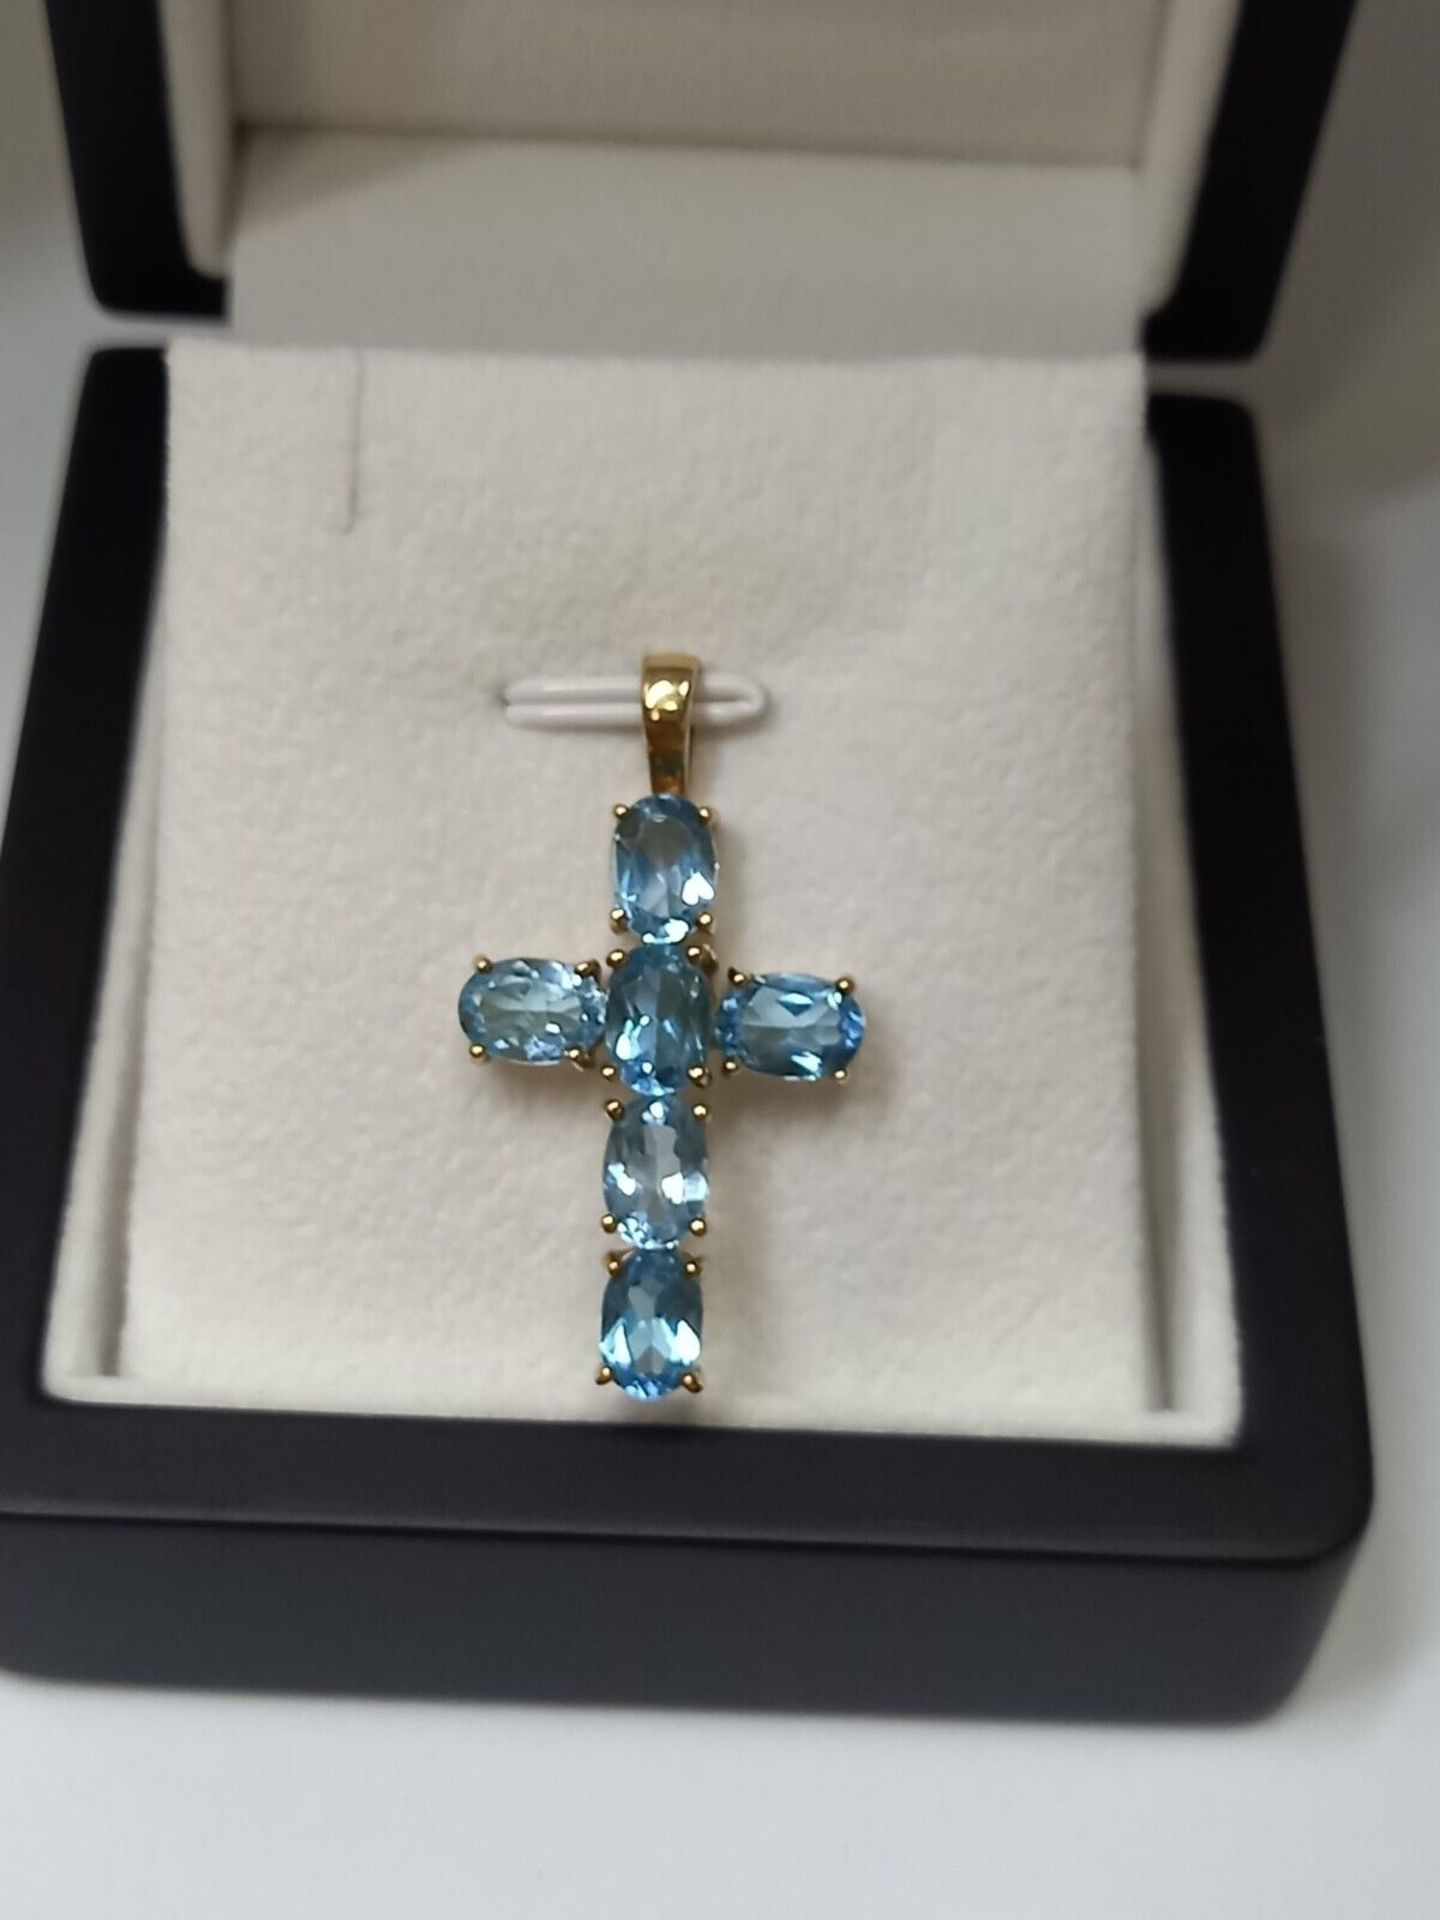 BLUE OVAL TOPAZ CROSS 9CT YELLOW GOLD IN GIFT BOX WITH VALUATION CERTIFICATE OF £895 - Image 3 of 6